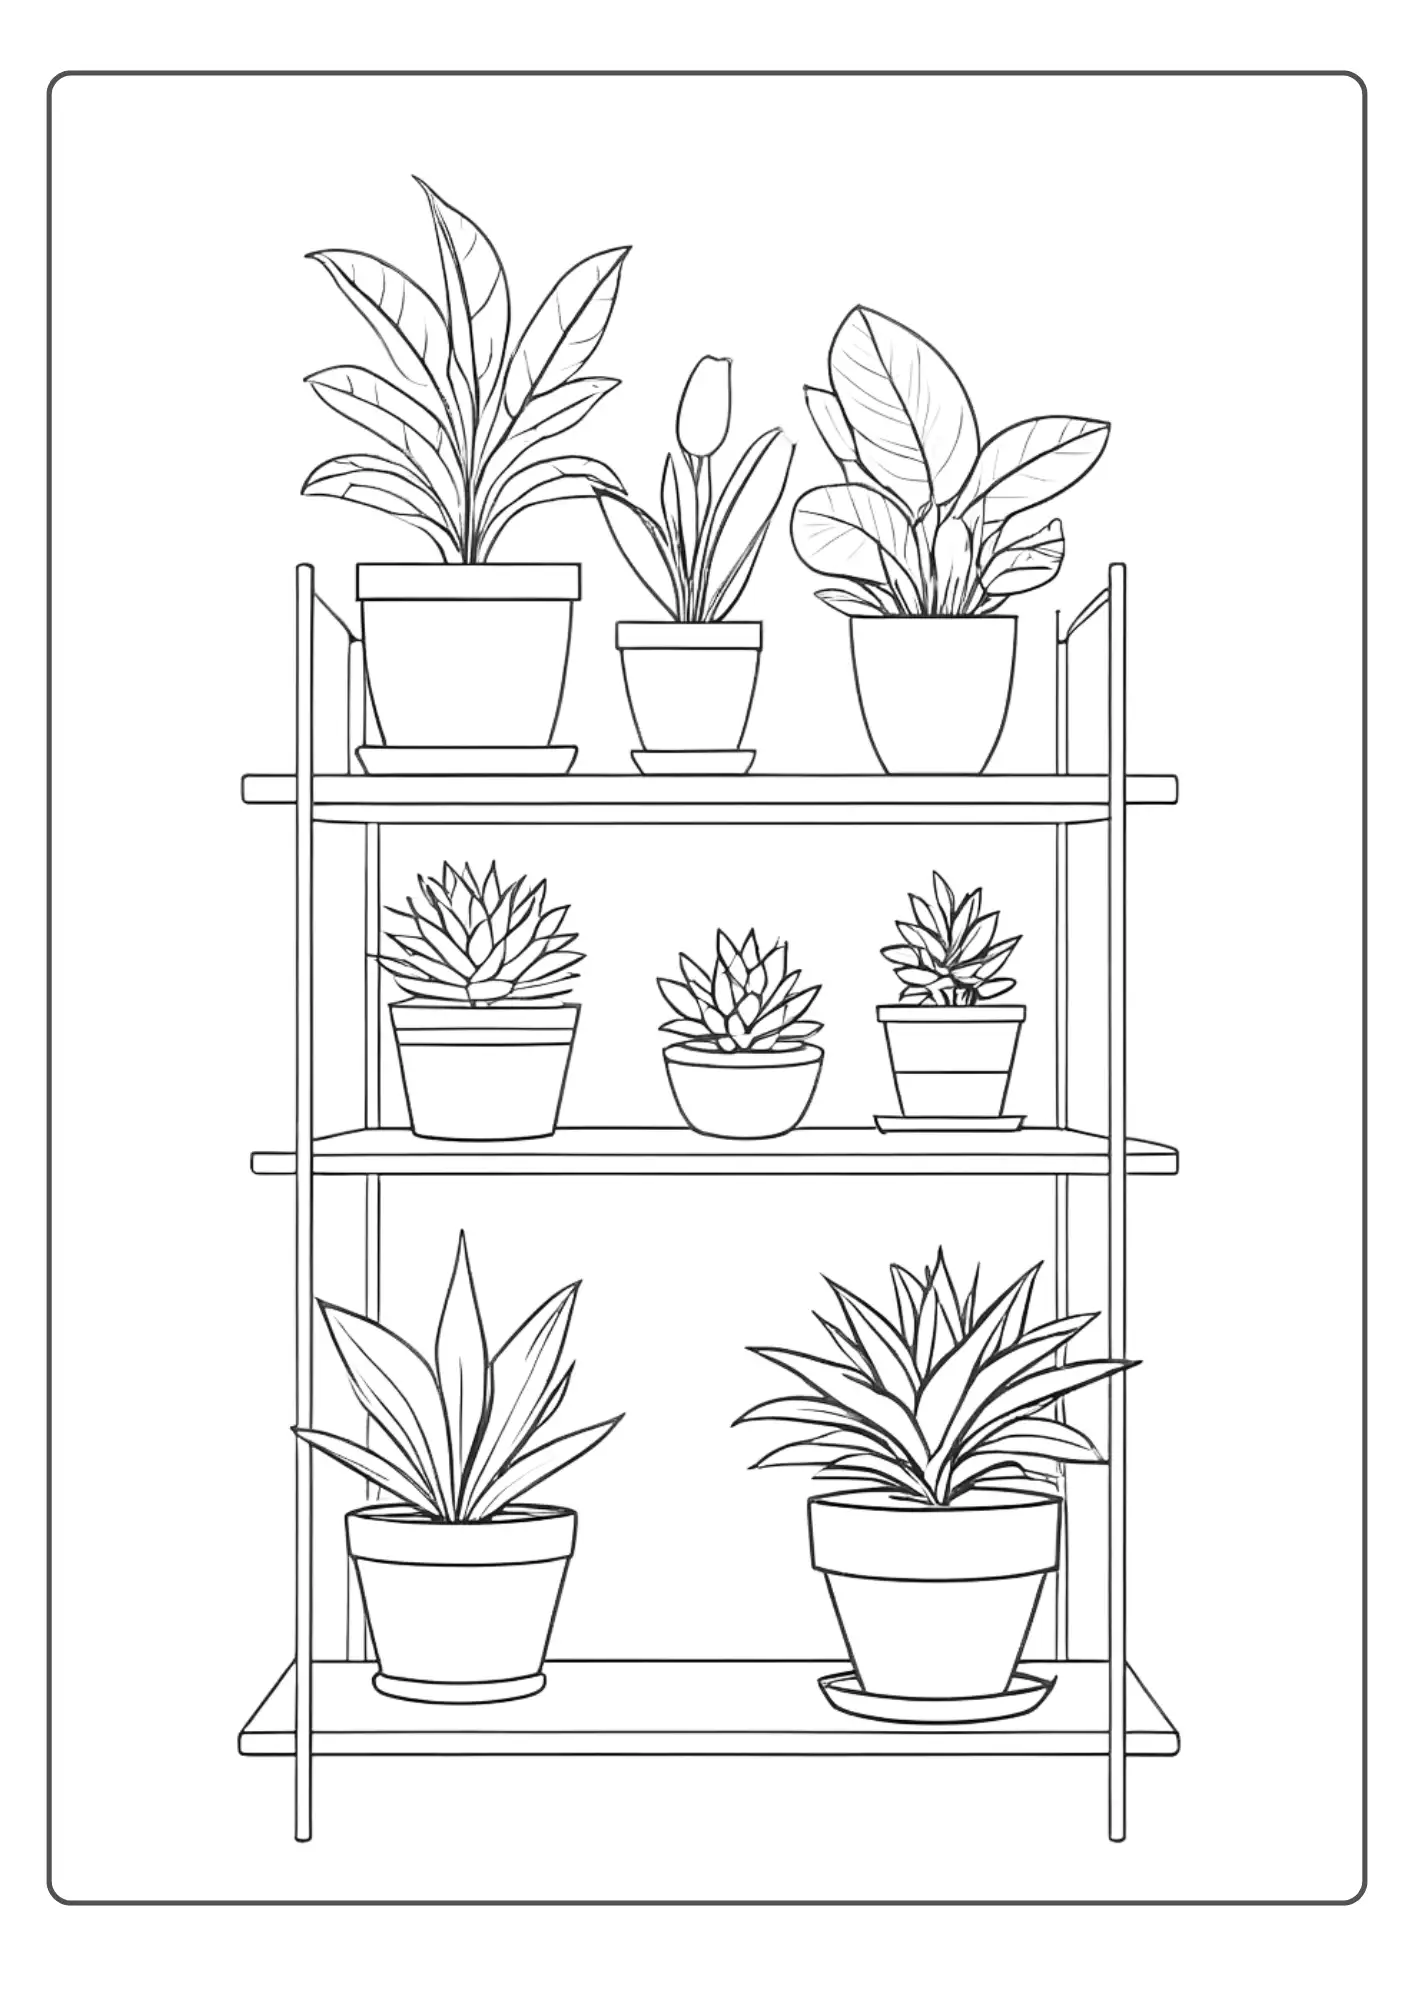 A Coloring Page With Plants On A Shelf